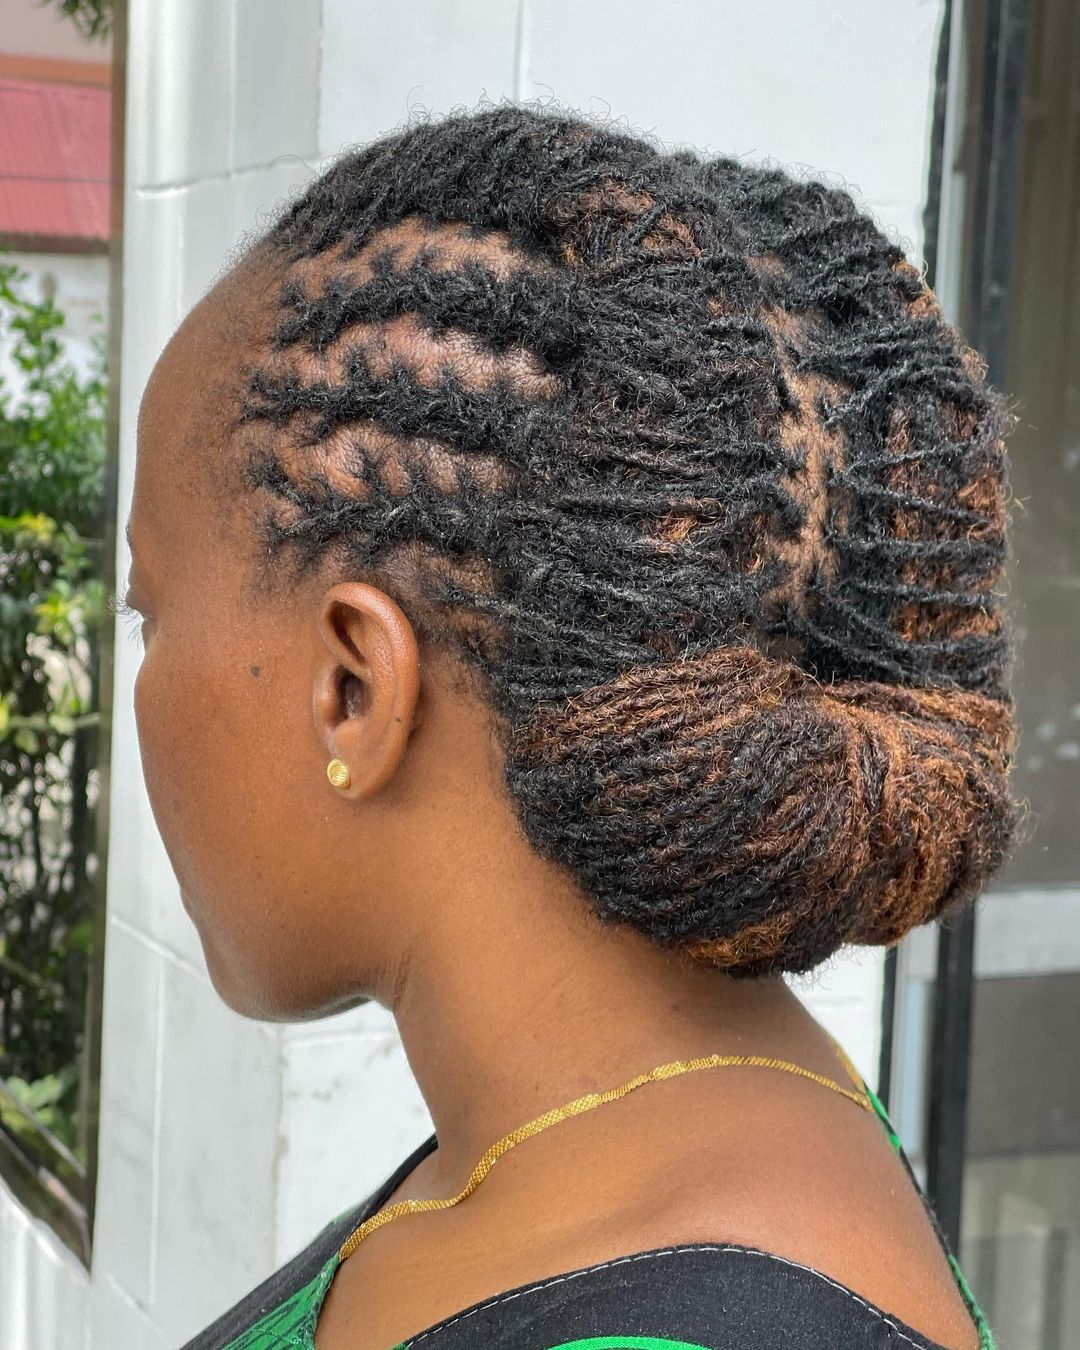 38. Intertwined Locs Style with Low Pony